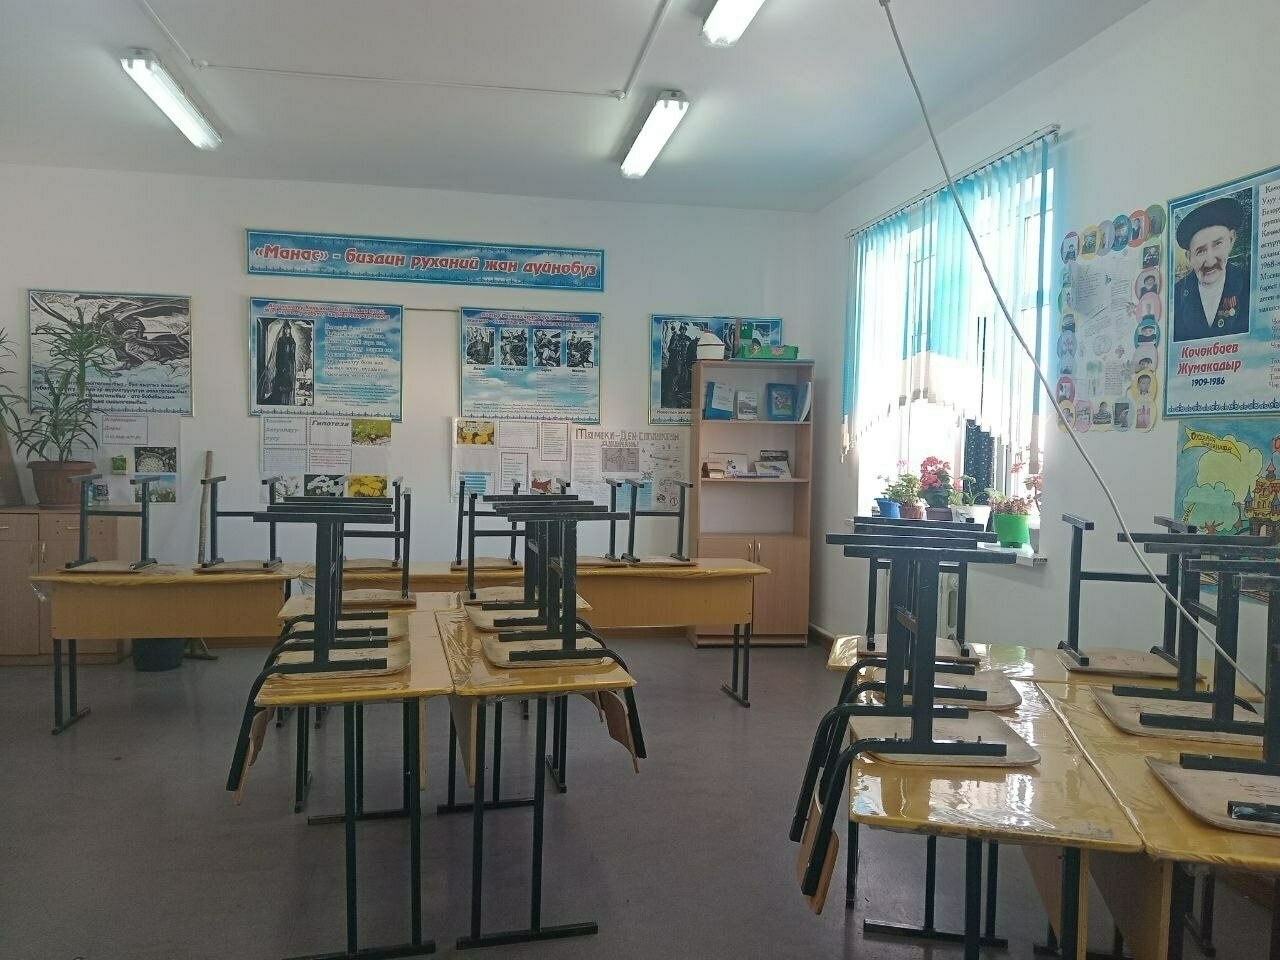 bright, clean classroom with chairs on top of the desks